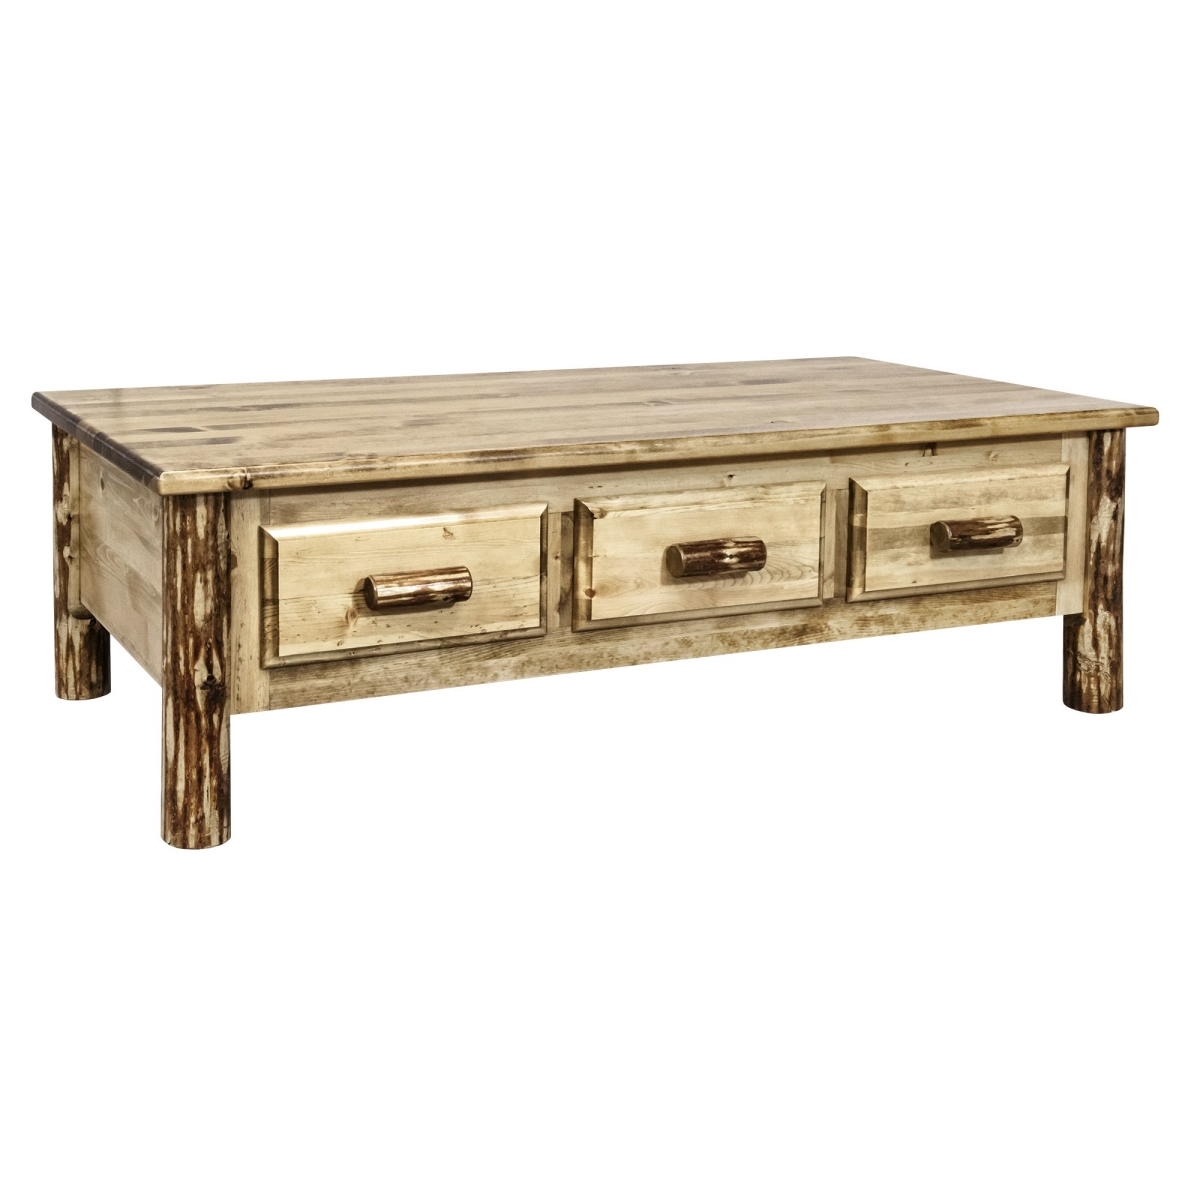 Montana Woodworks MWGCCT6D Glacier Country Collection Large Coffee Table with 6 Drawers, Ready to Finish